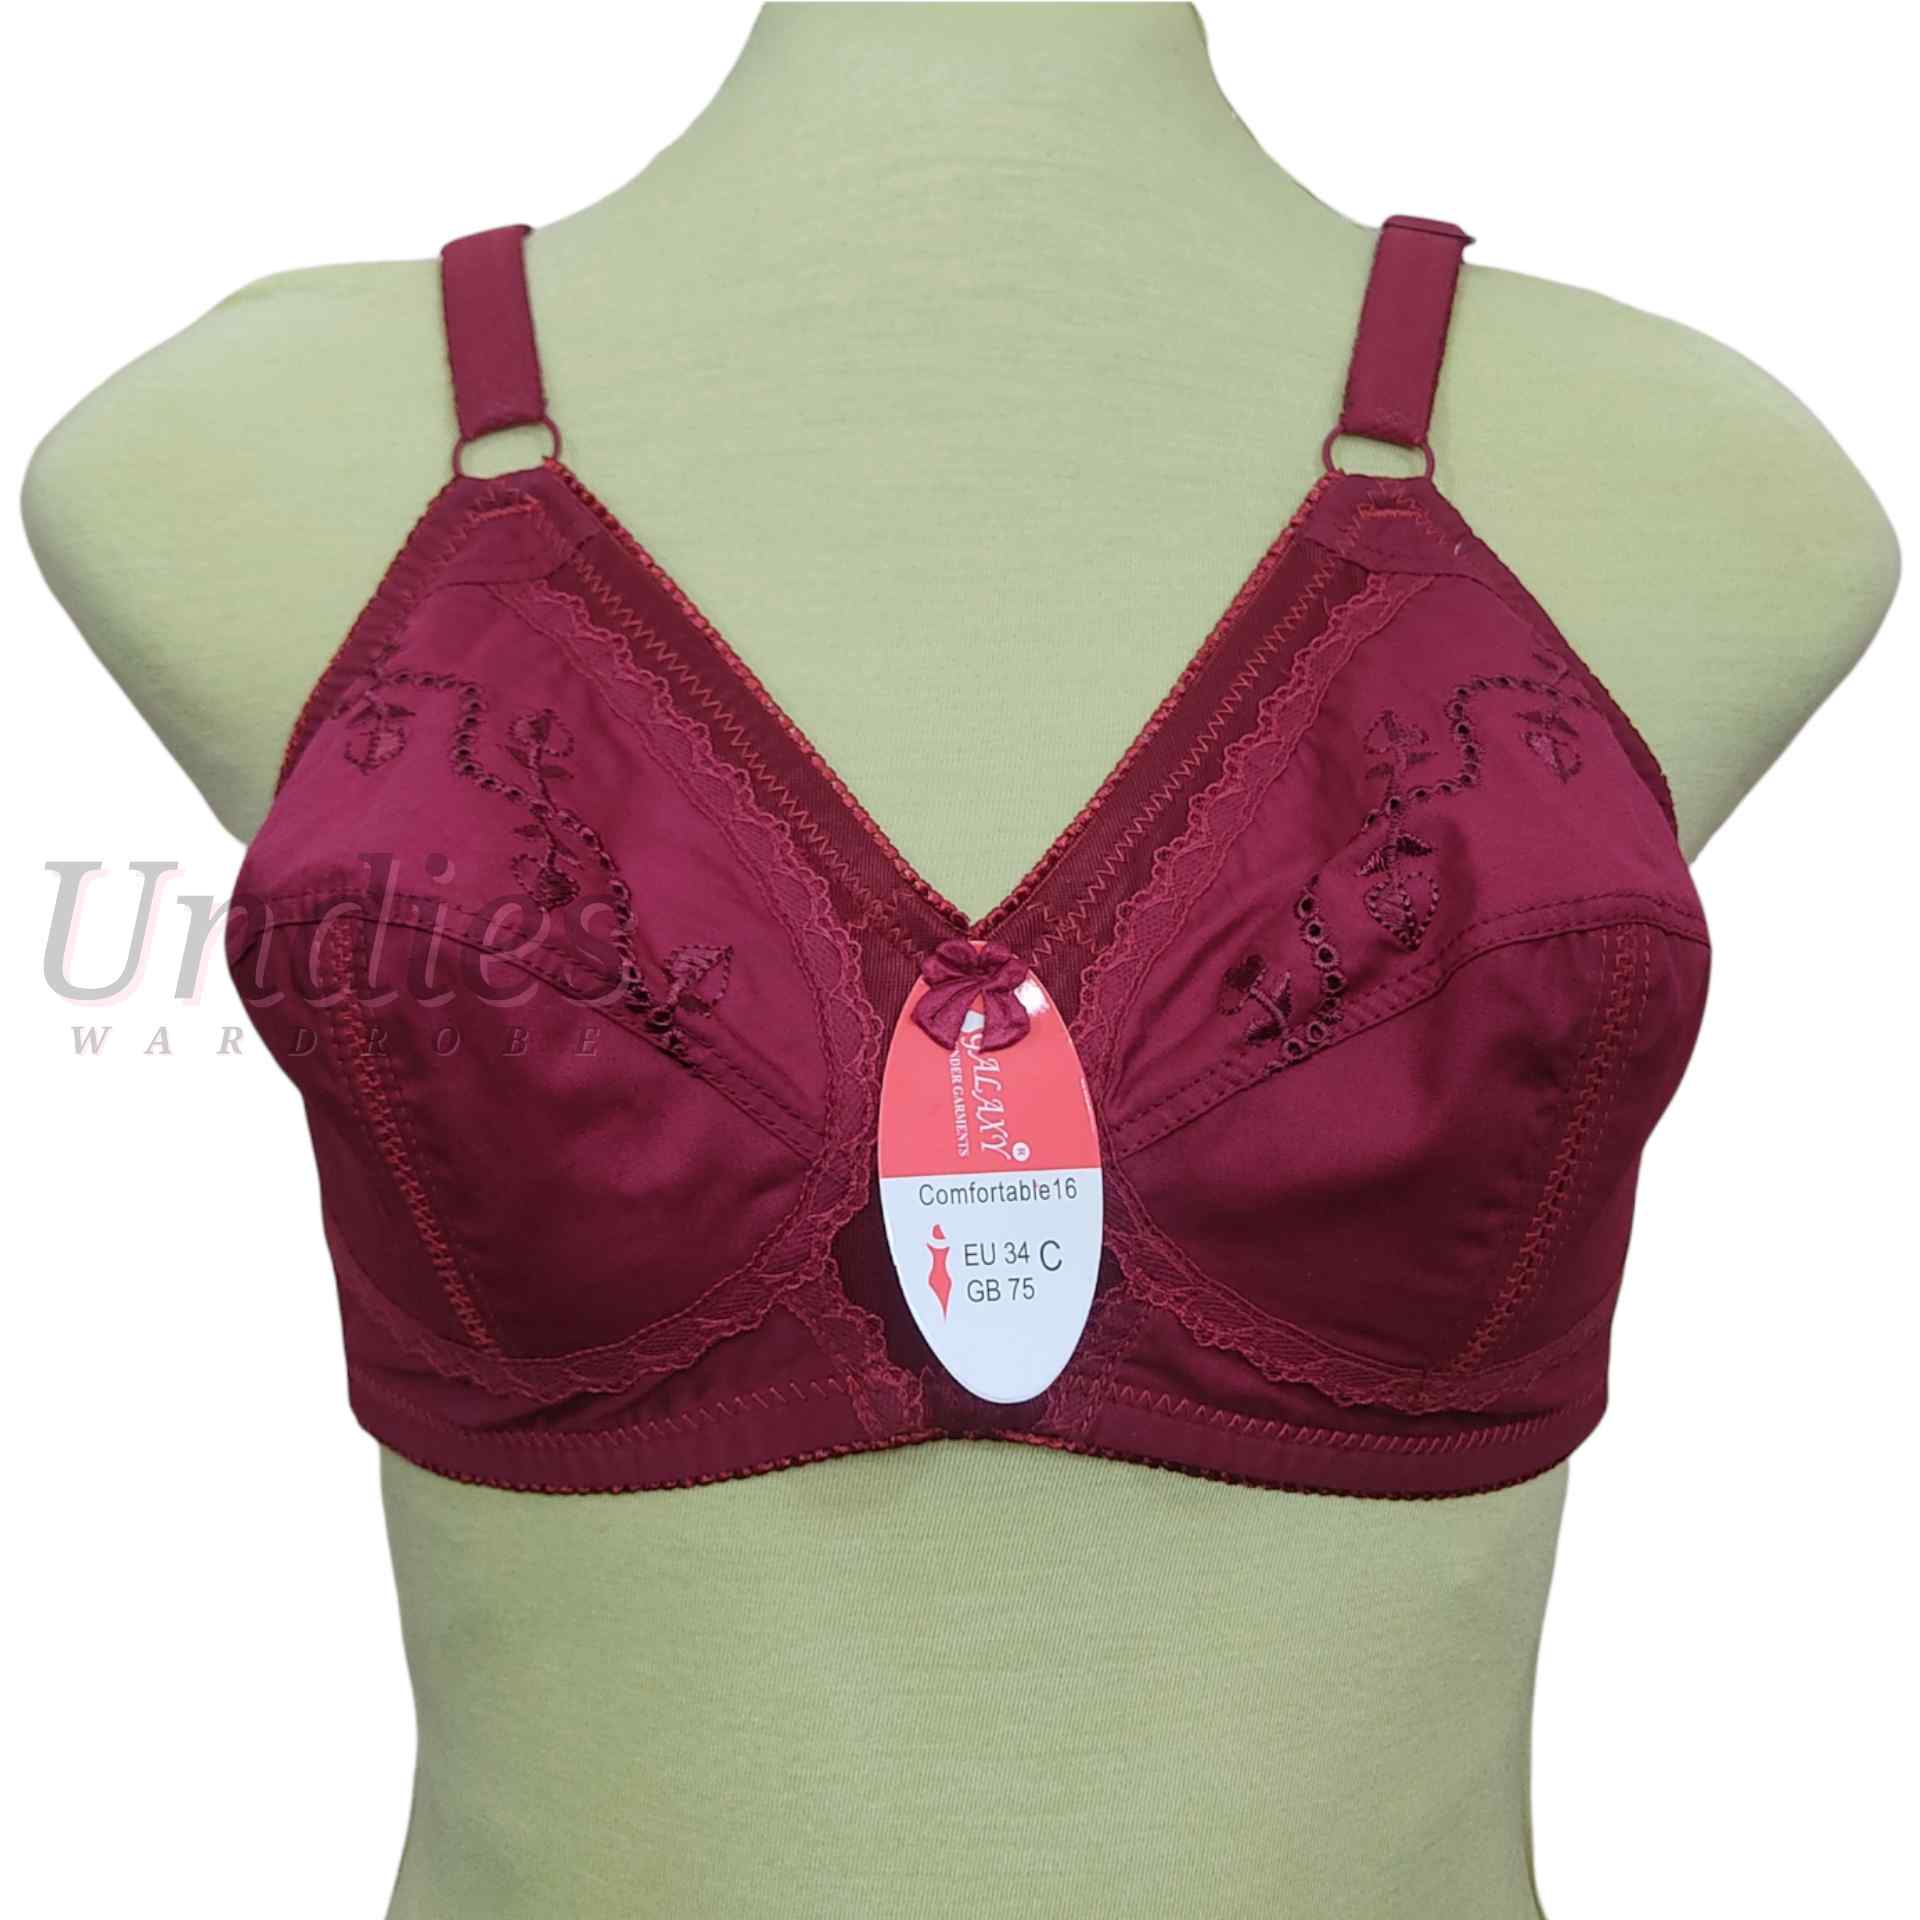 Comfort 16 Cotton bra Sizes 32 to 44 Cup size B C D E